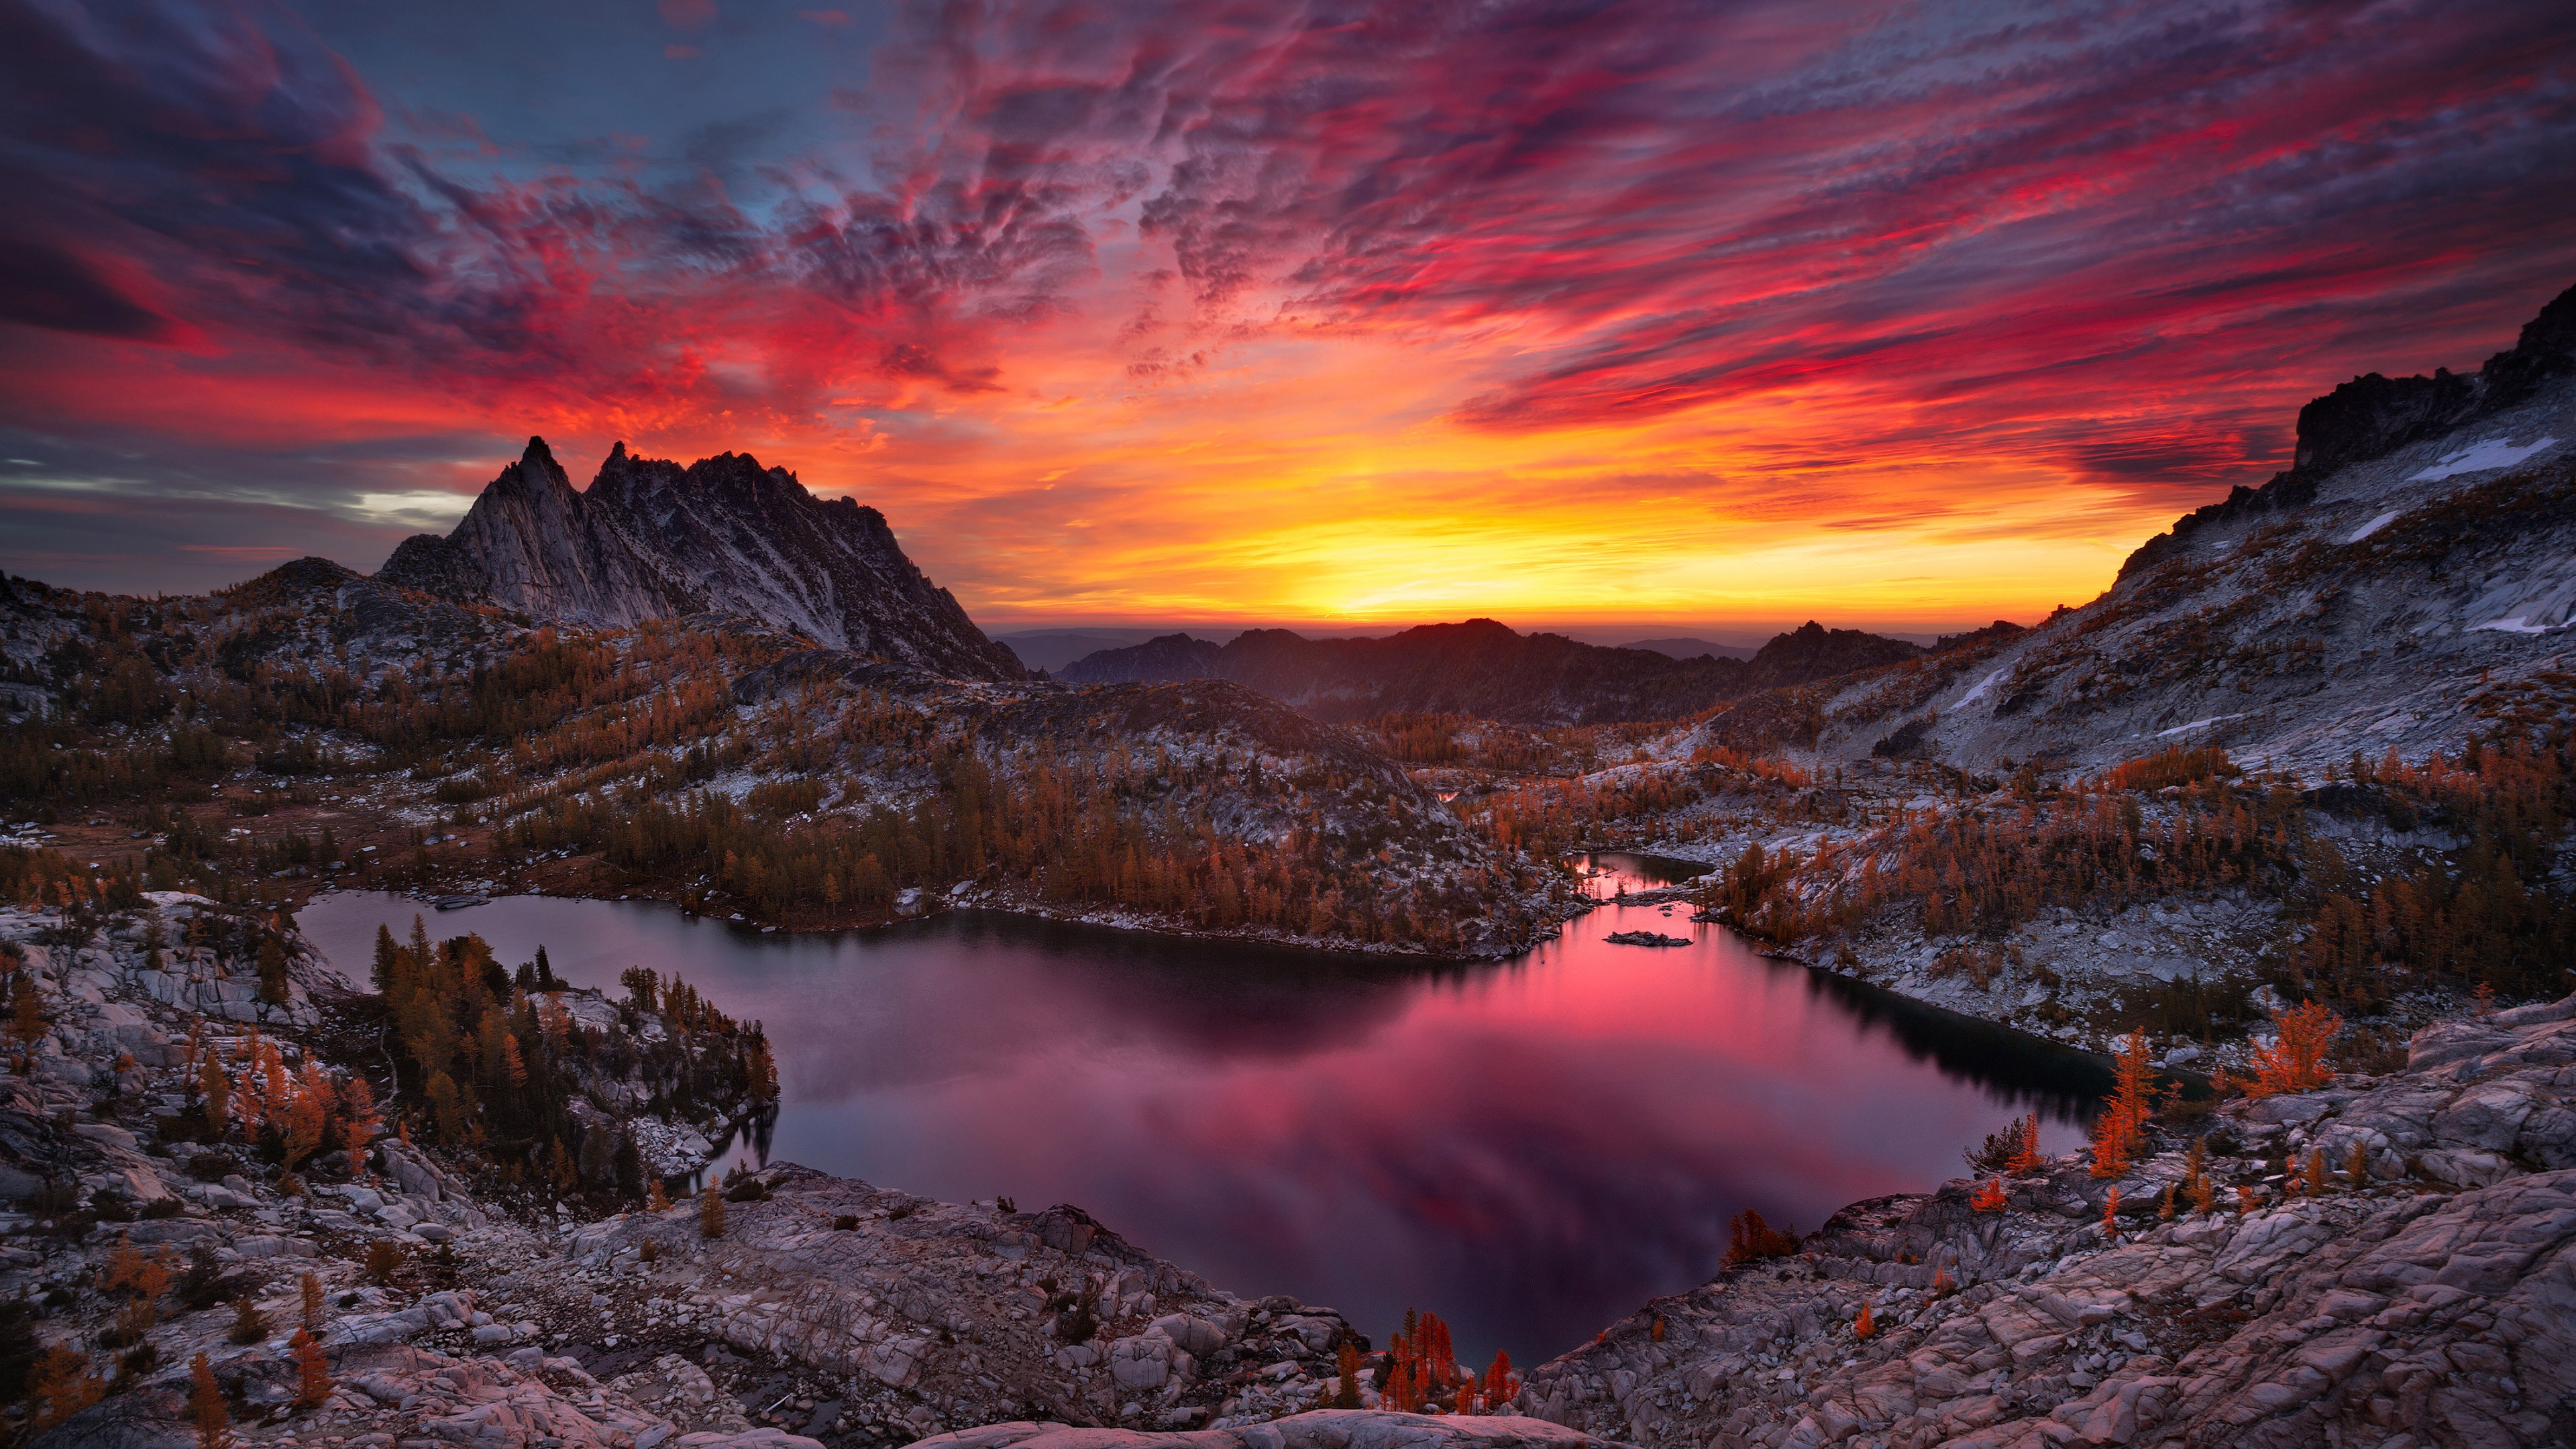 General 3840x2160 landscape lake mountains sunset skyscape clouds orange sky nature cold ice outdoors winter